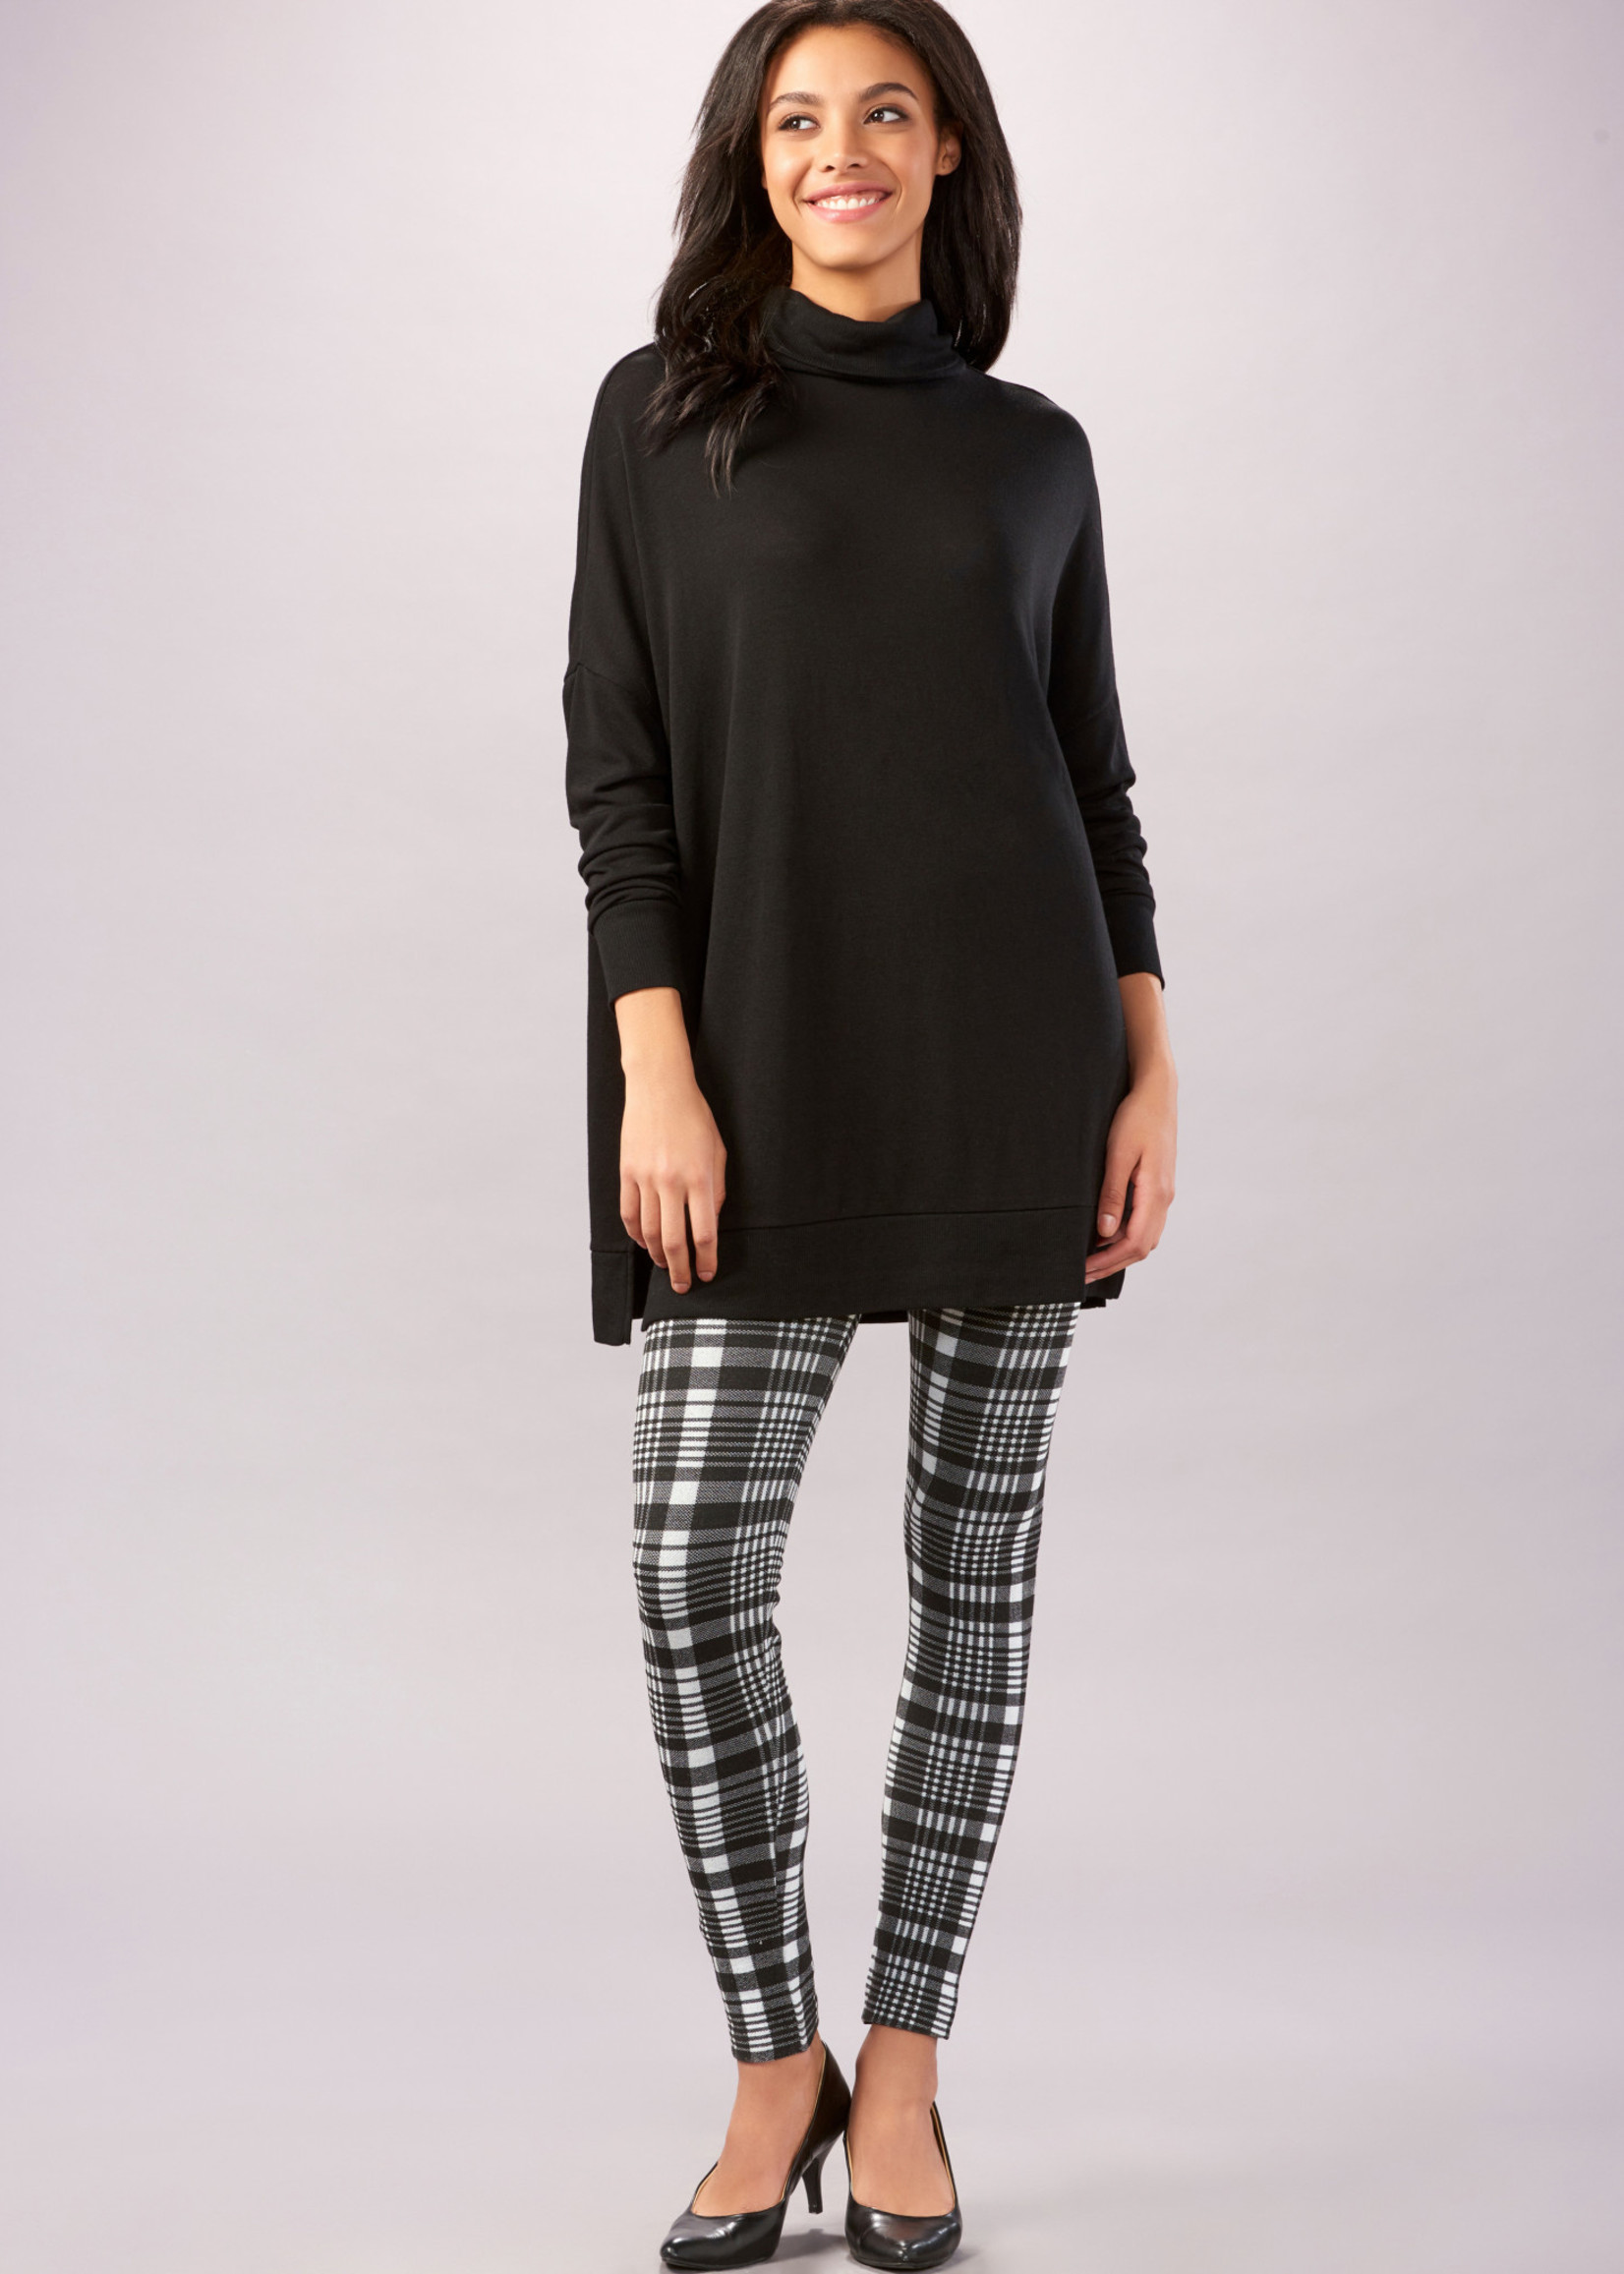 Charlie Page L/XL Houndstooth Plaid Fleece Lined Leggings